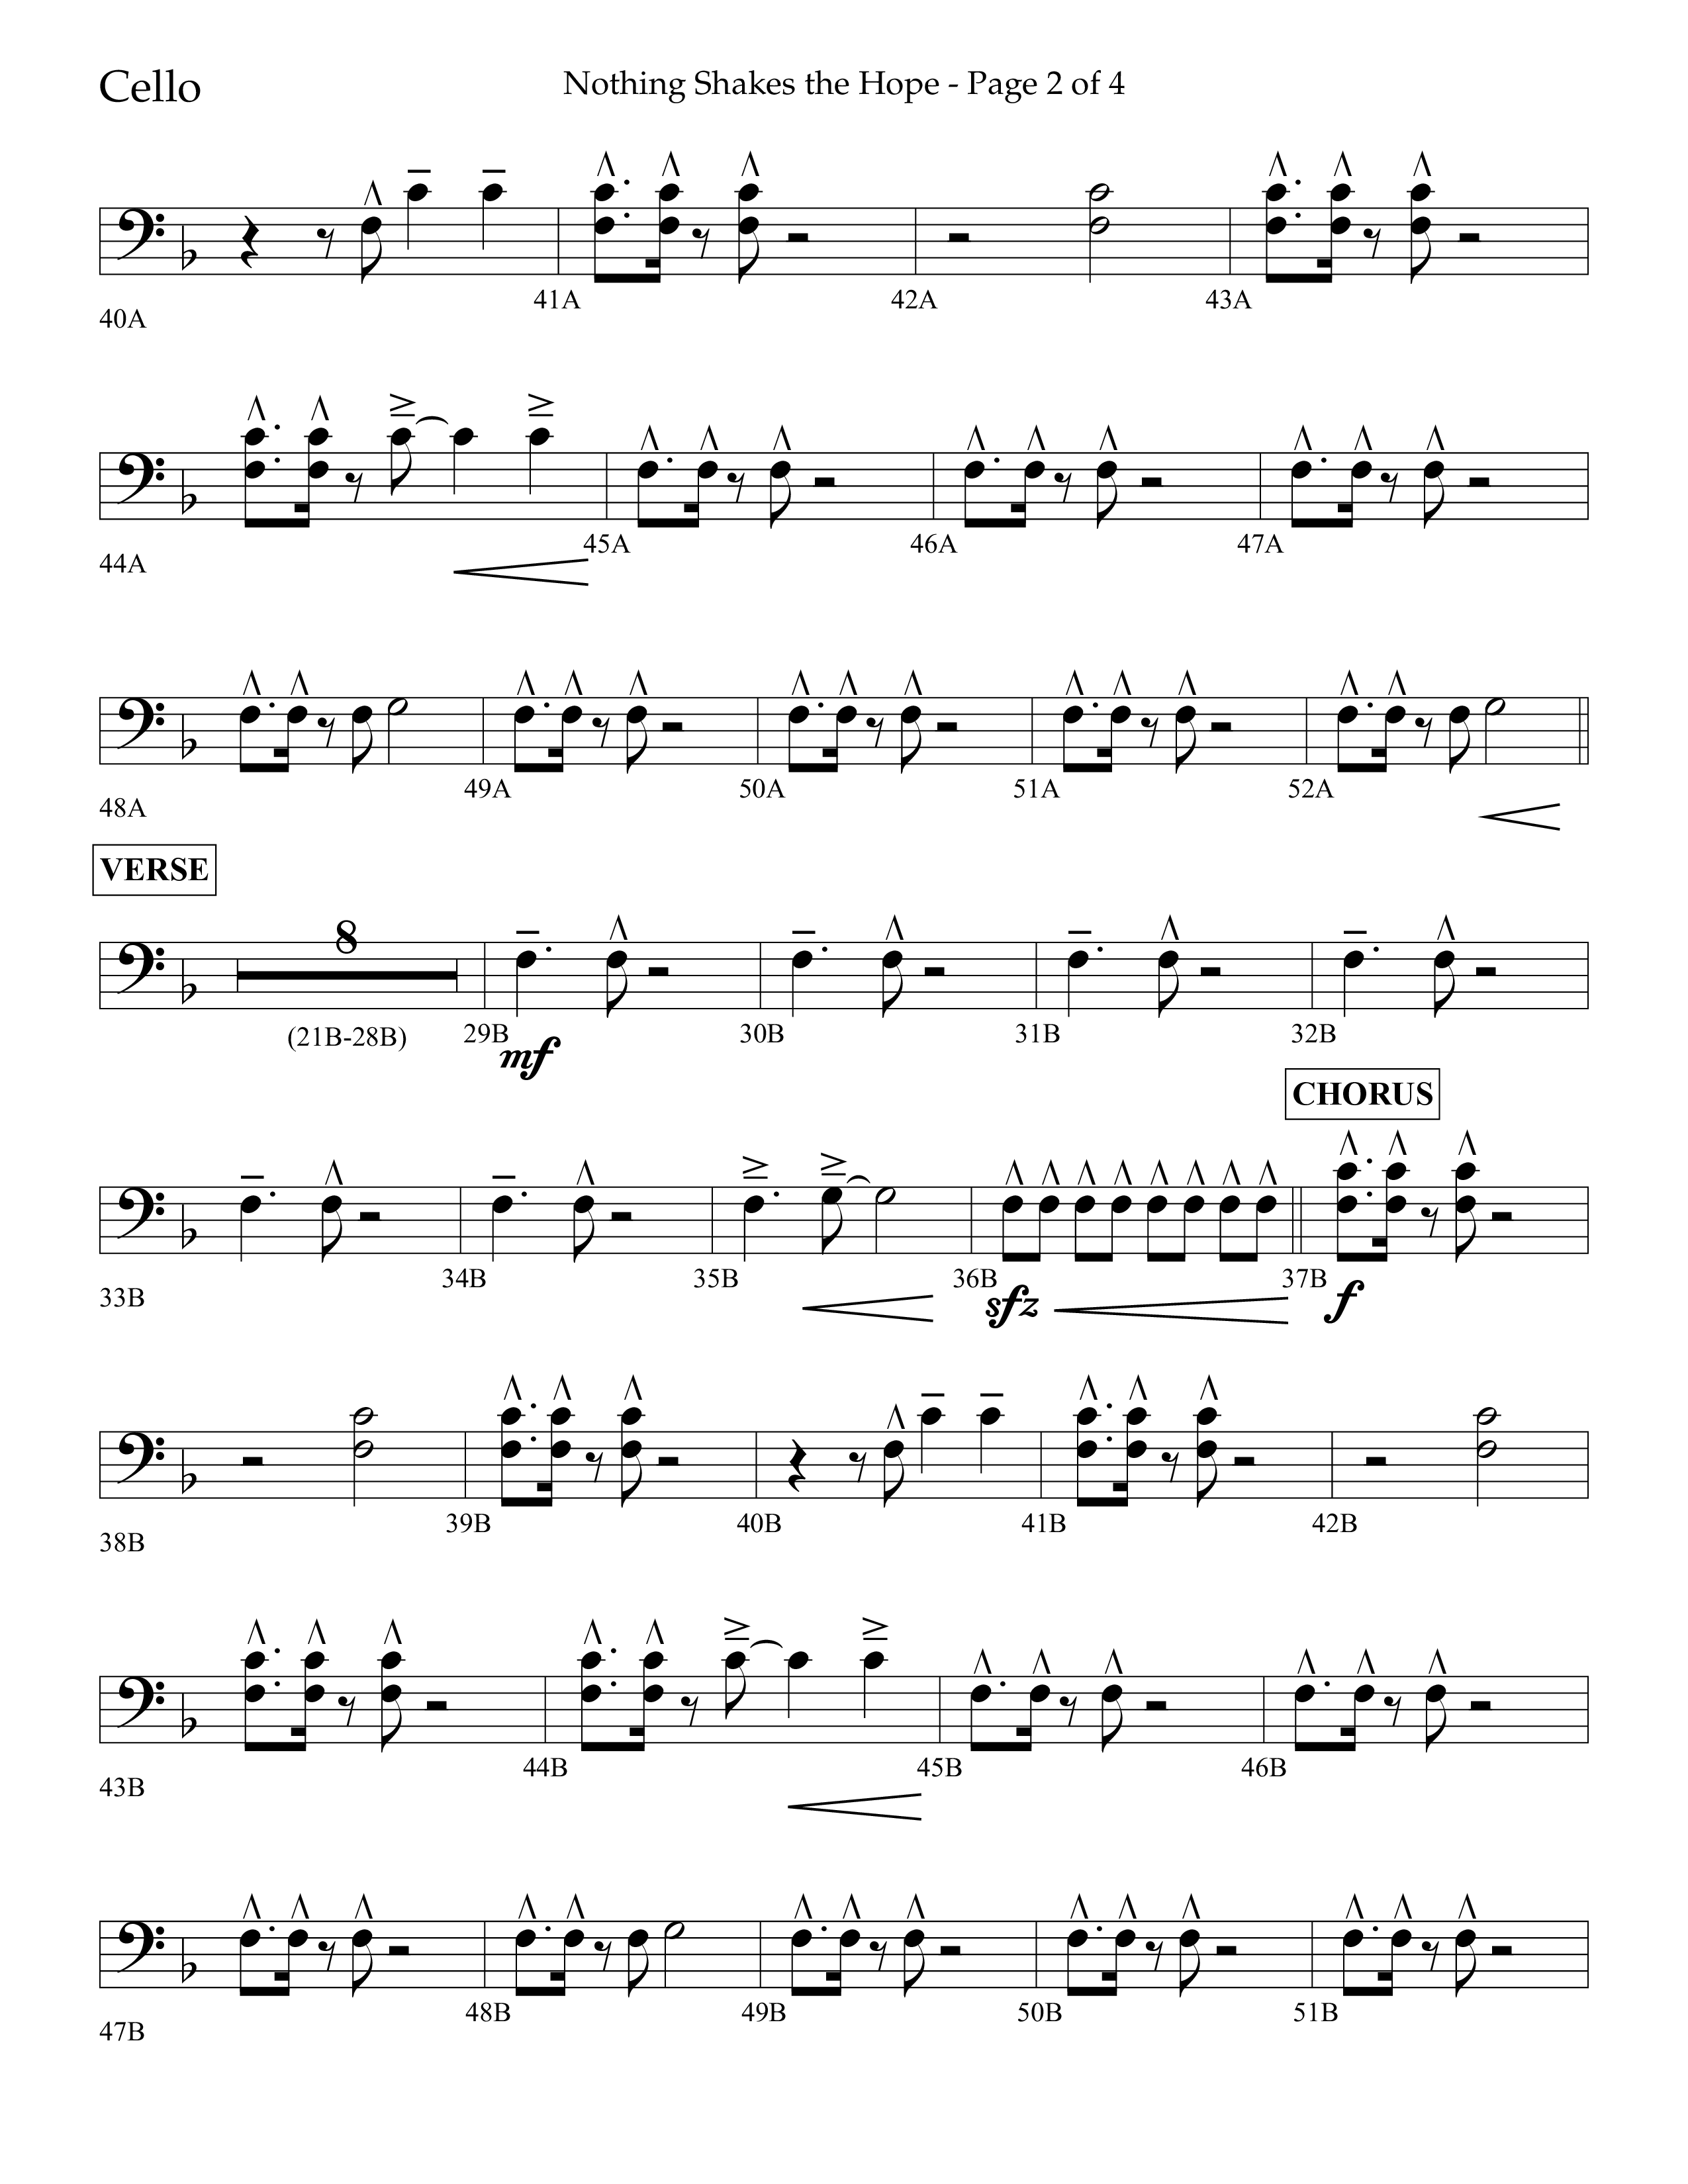 Nothing Shakes The Hope (Choral Anthem SATB) Cello (Lifeway Choral / Arr. John Bolin / Arr. Don Koch / Orch. Cliff Duren)